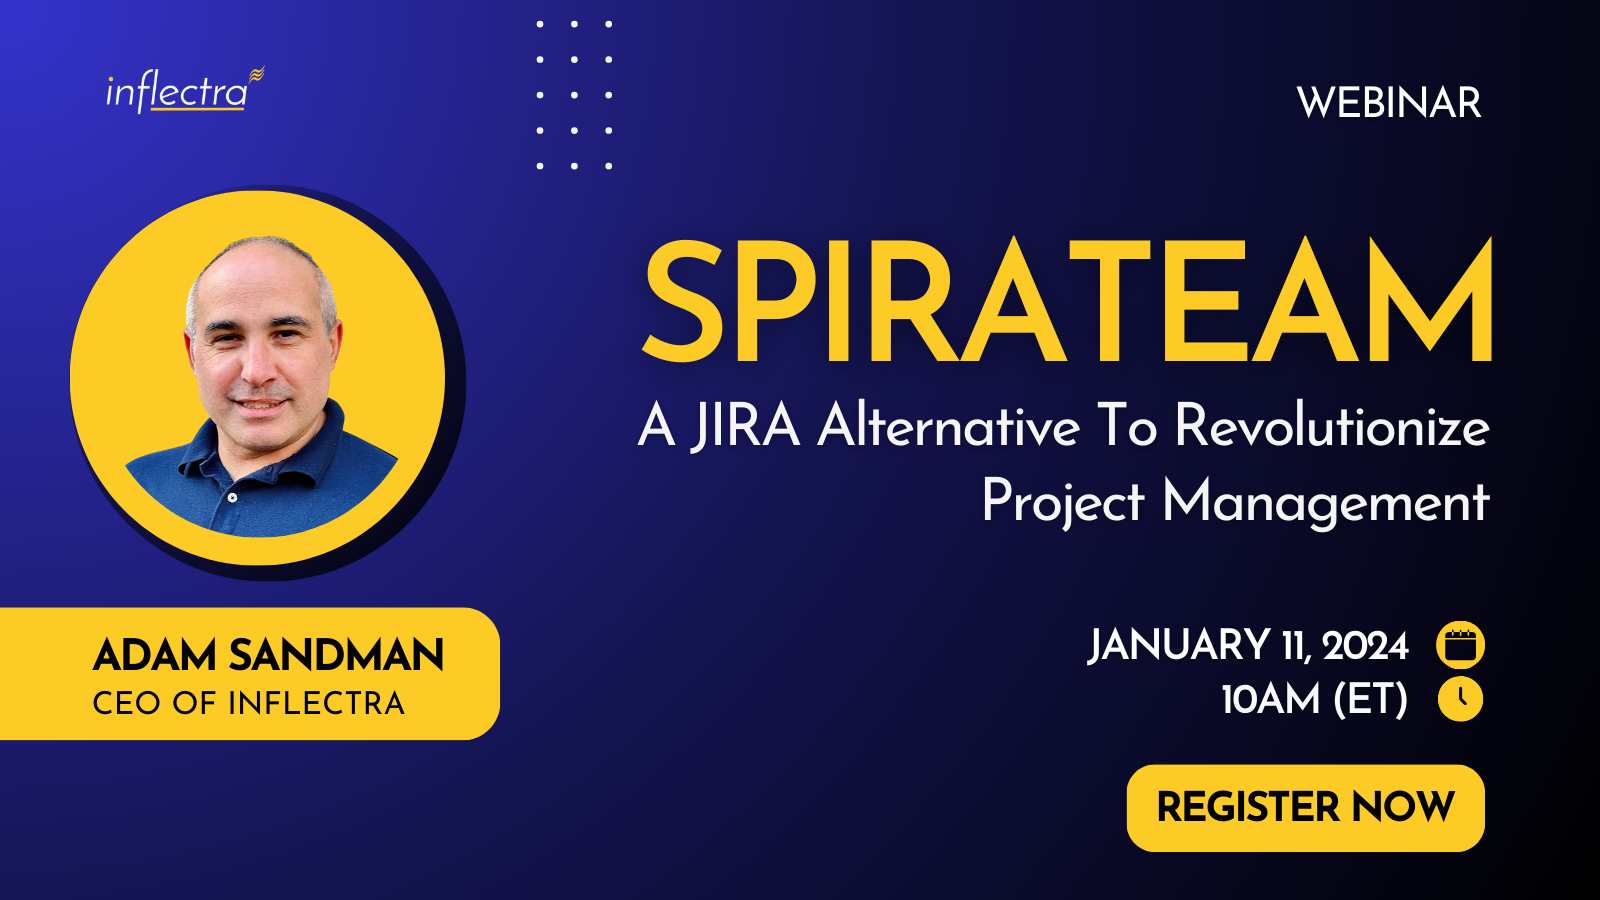 webinar-discover-the-power-of-spirateam-a-jira-alternative-to-revolutionize-your-project-management-image